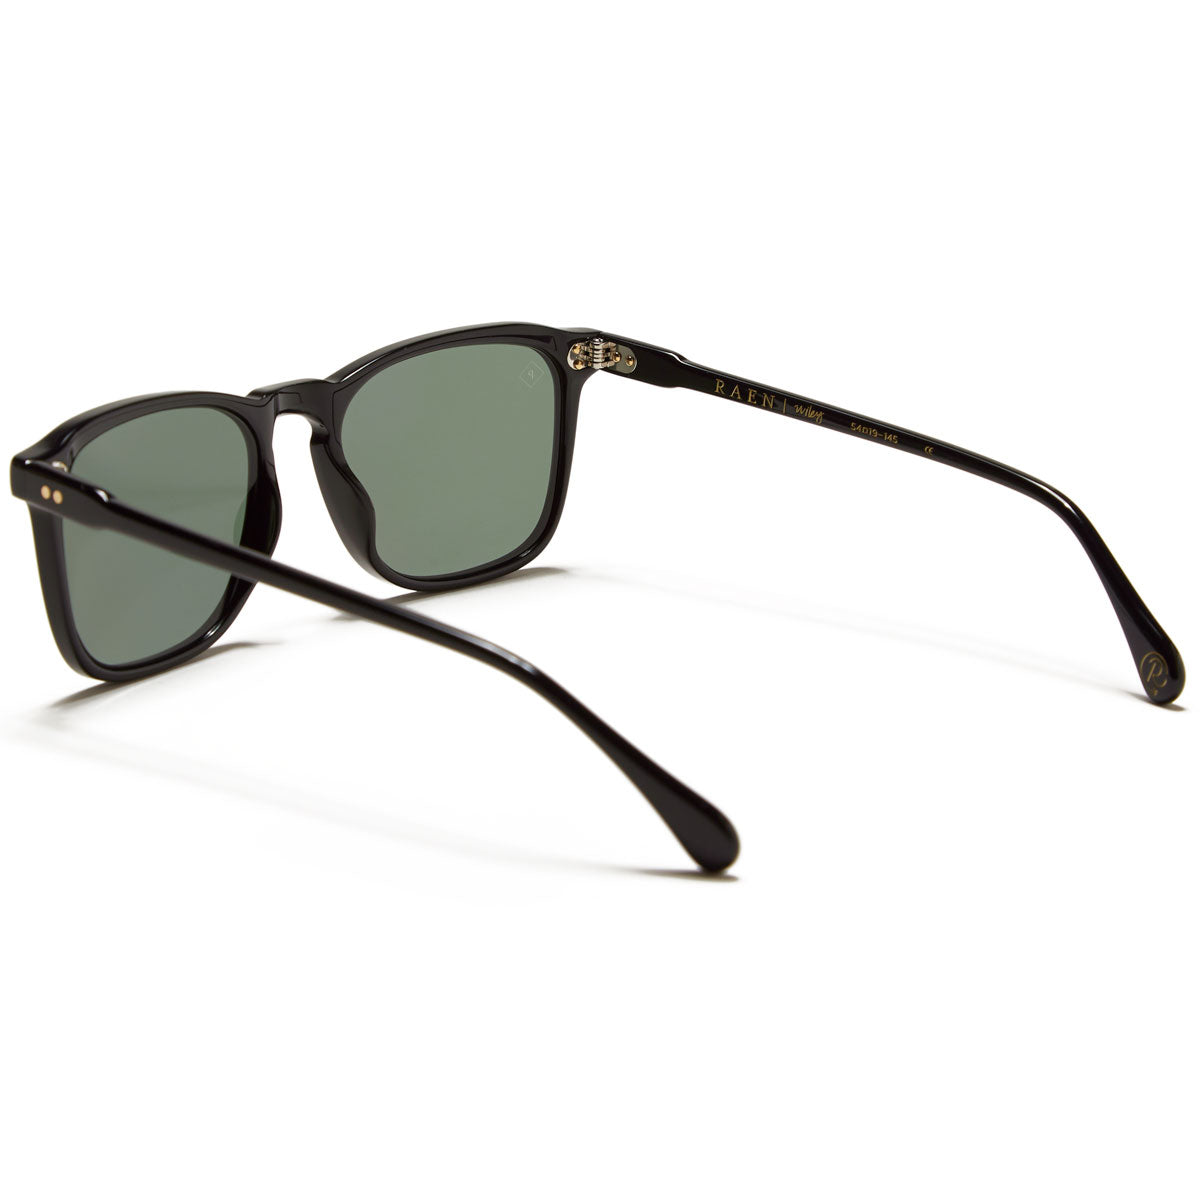 Raen Wiley 54 Sunglasses - Recycled Black/Green Polarized image 3